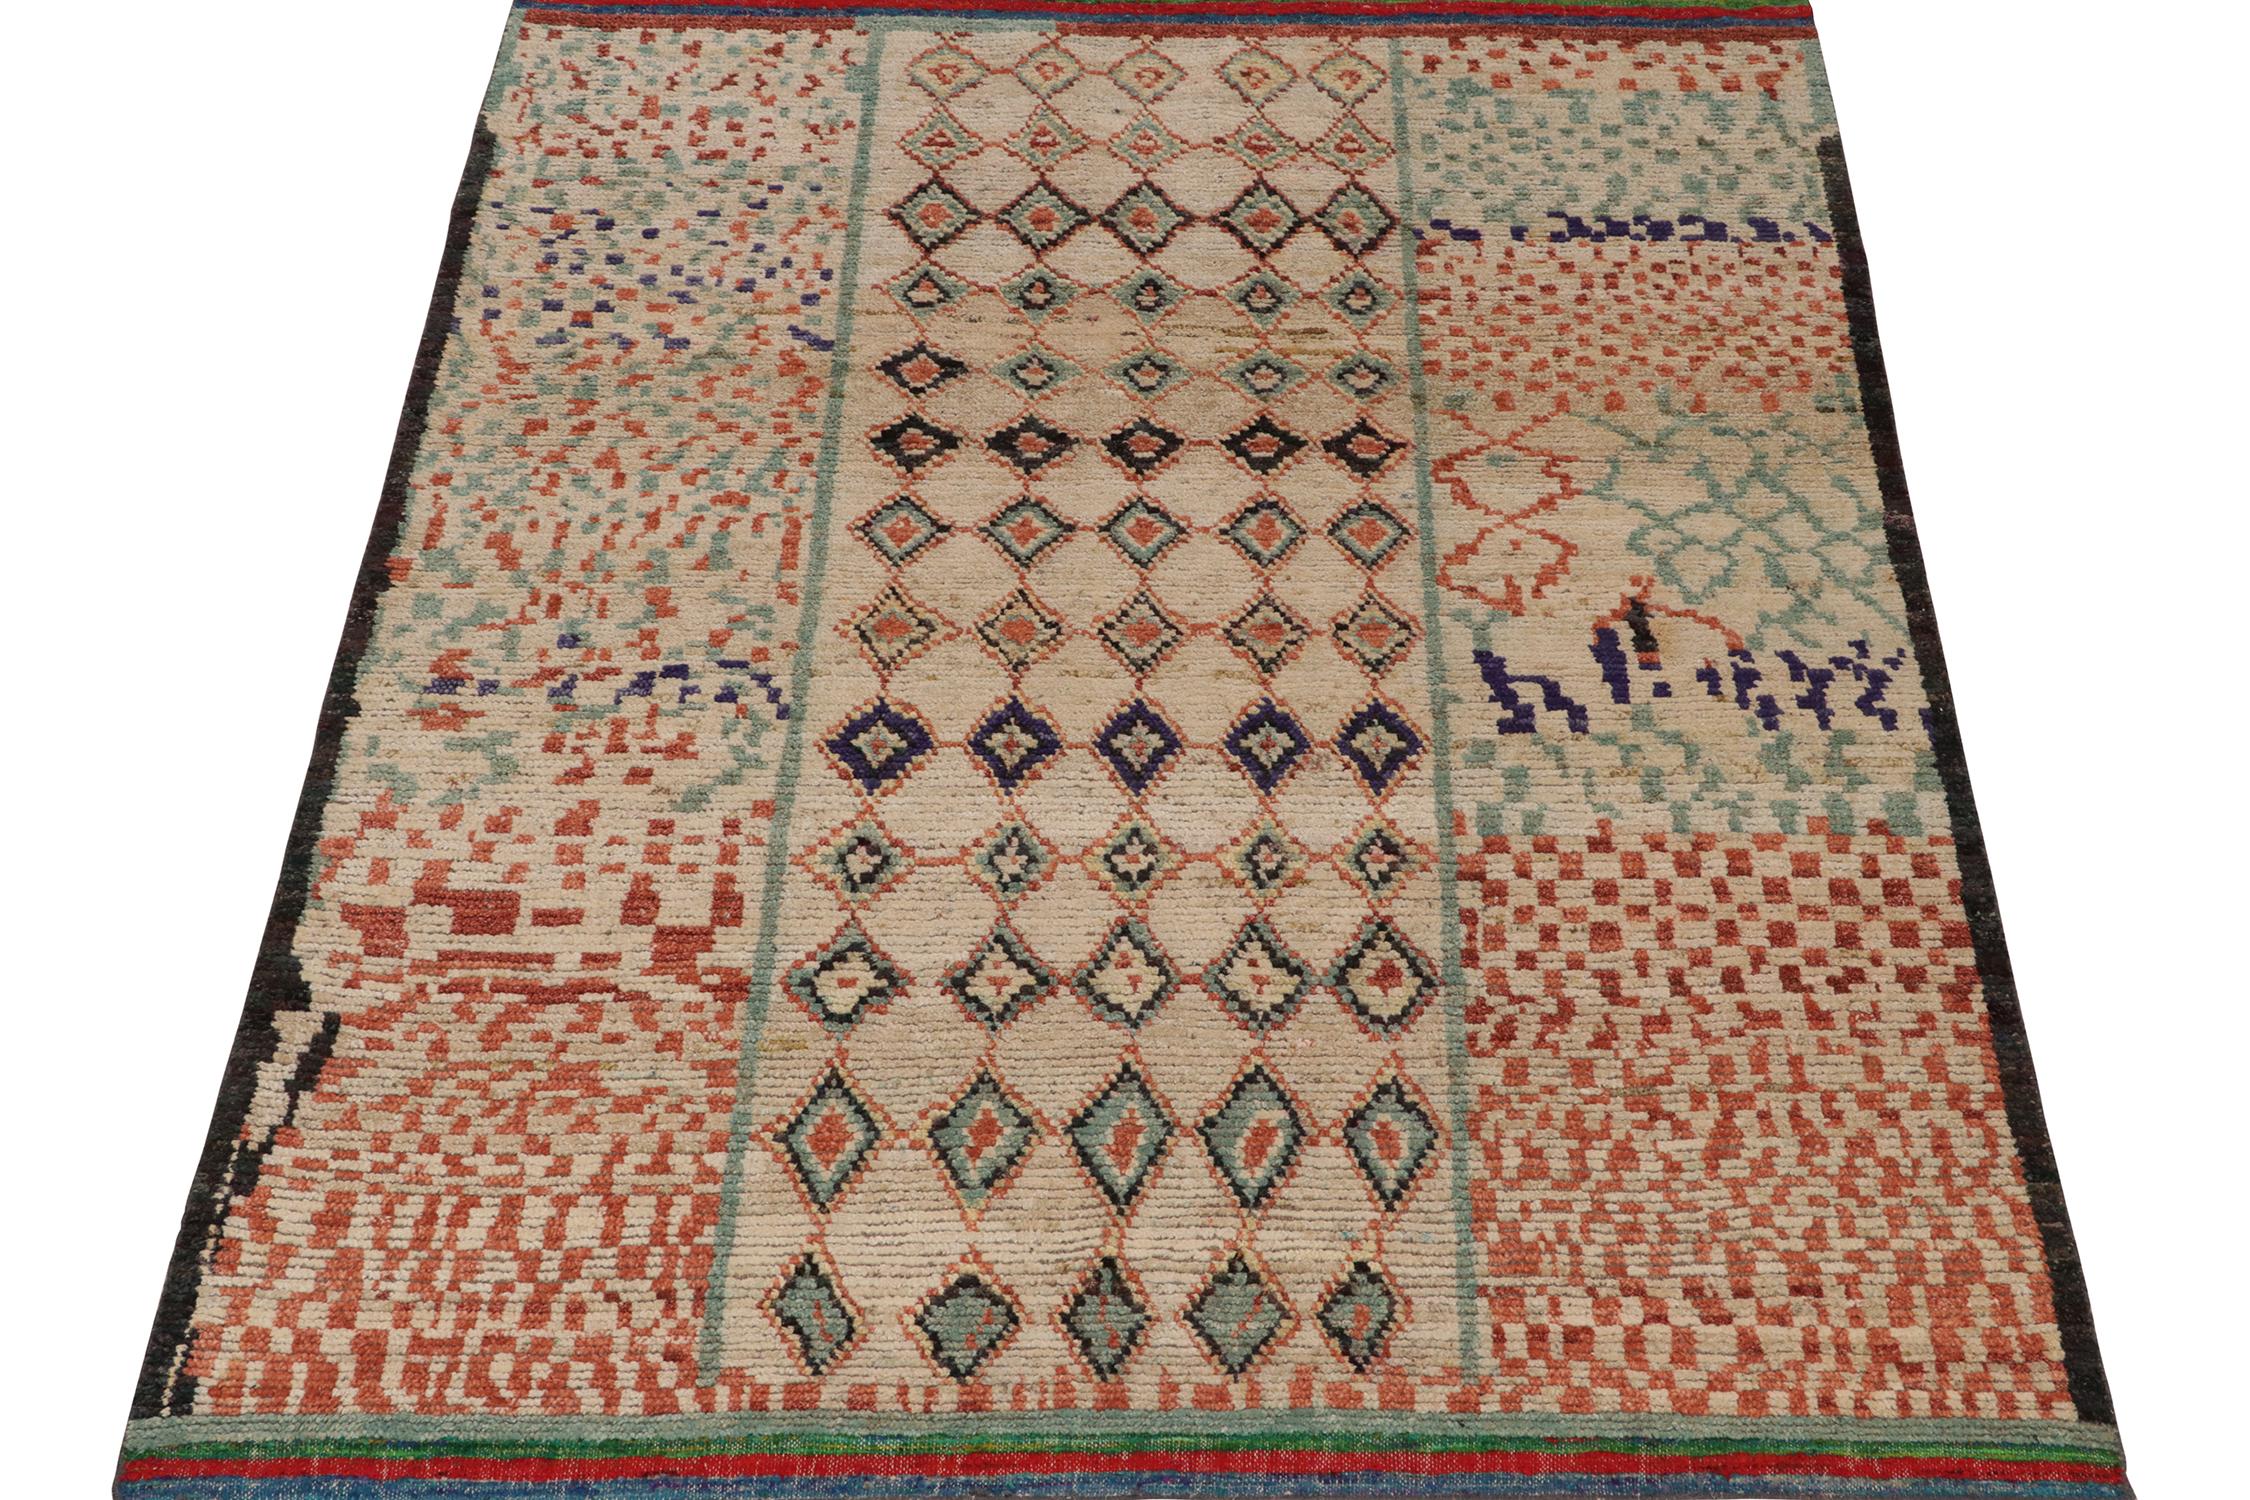 Tribal Rug & Kilim’s Moroccan Style Rug in Beige, Red and Blue Geometric Patterns For Sale